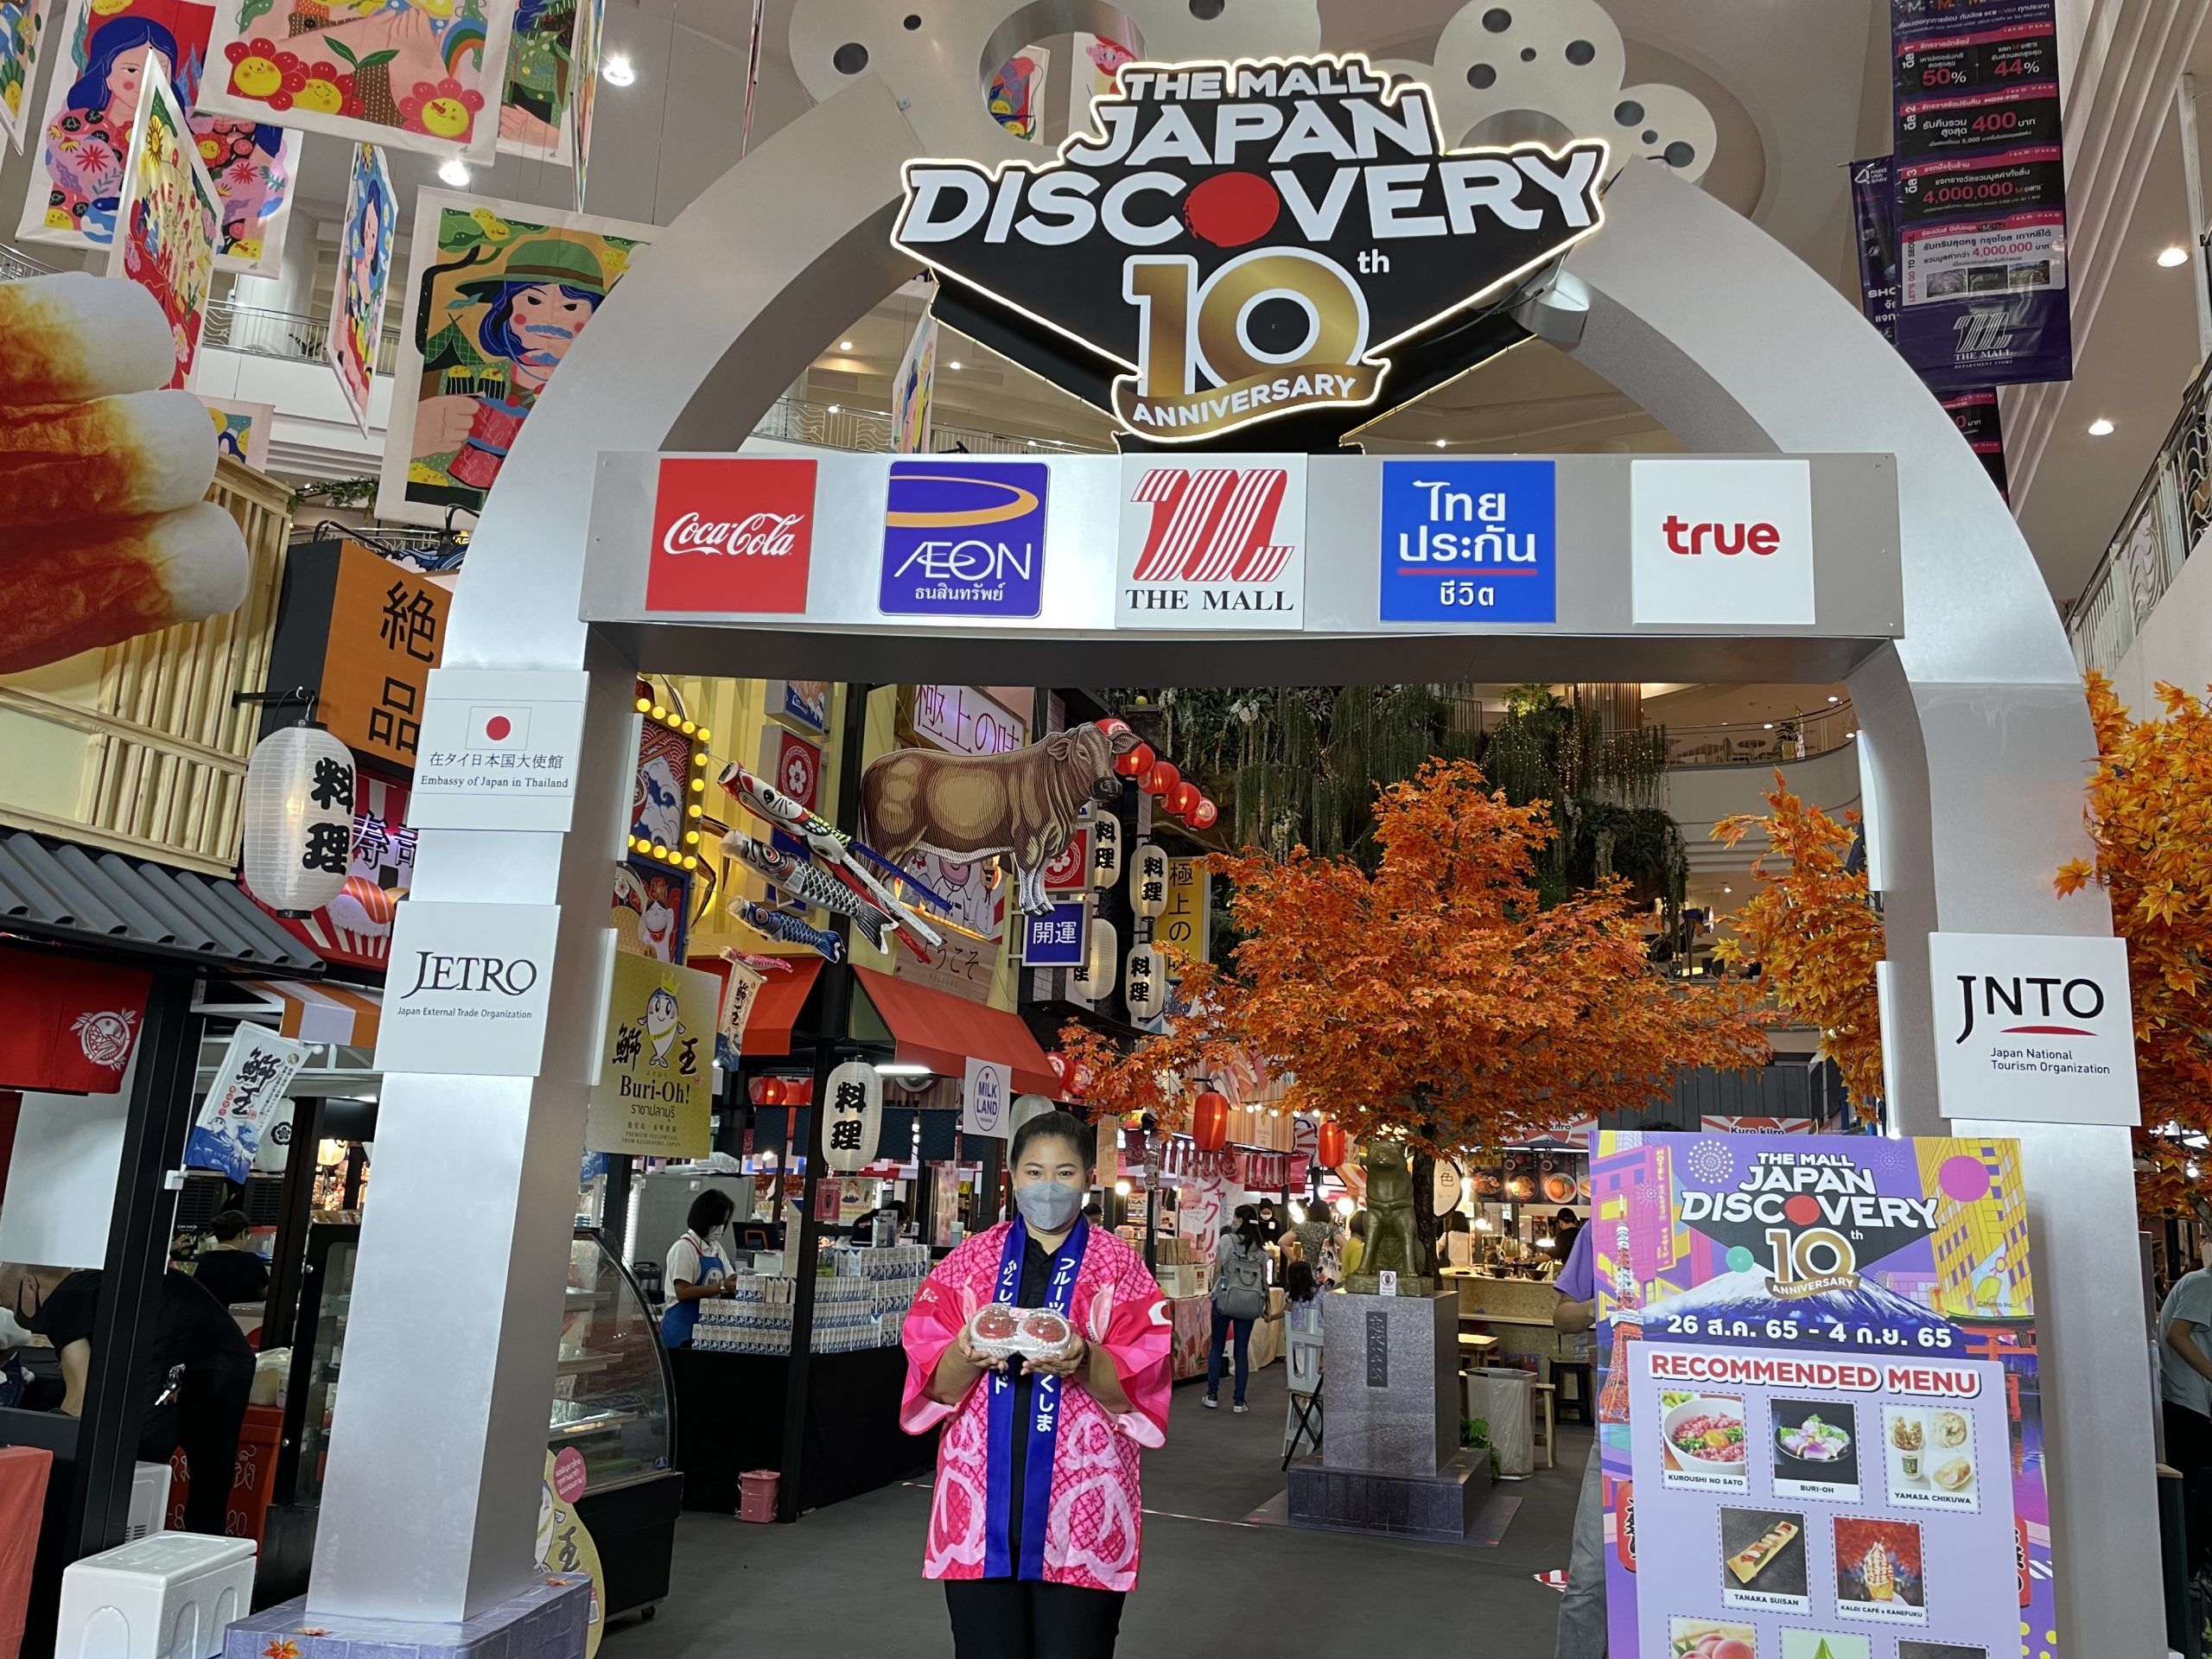 THE MALL JAPAN DISCOVERY 2022 : 10th ANNIVERSARY The biggest event of the year to celebrate the 10th anniversary.